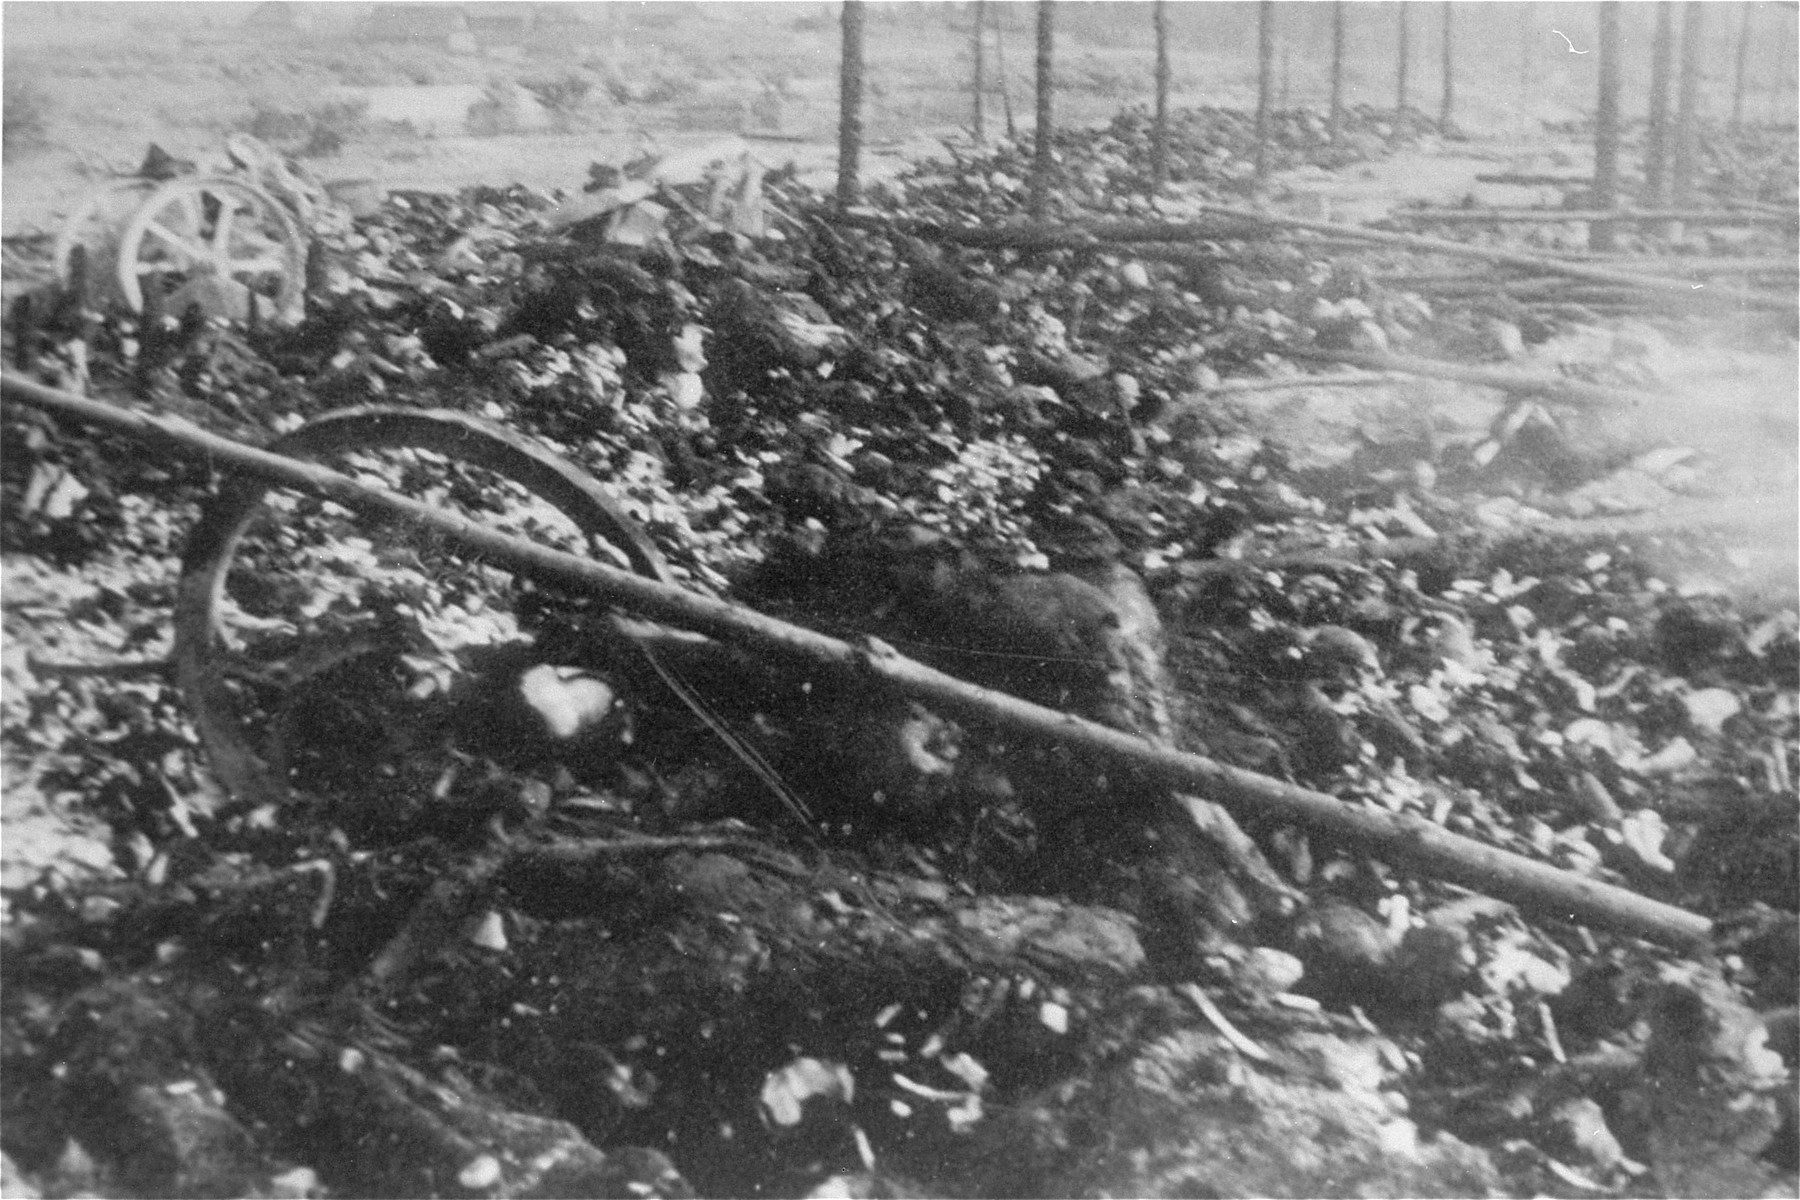 View of the charred remains of Jewish victims burned in a barn by the Germans near the Maly Trostinets concentration camp.